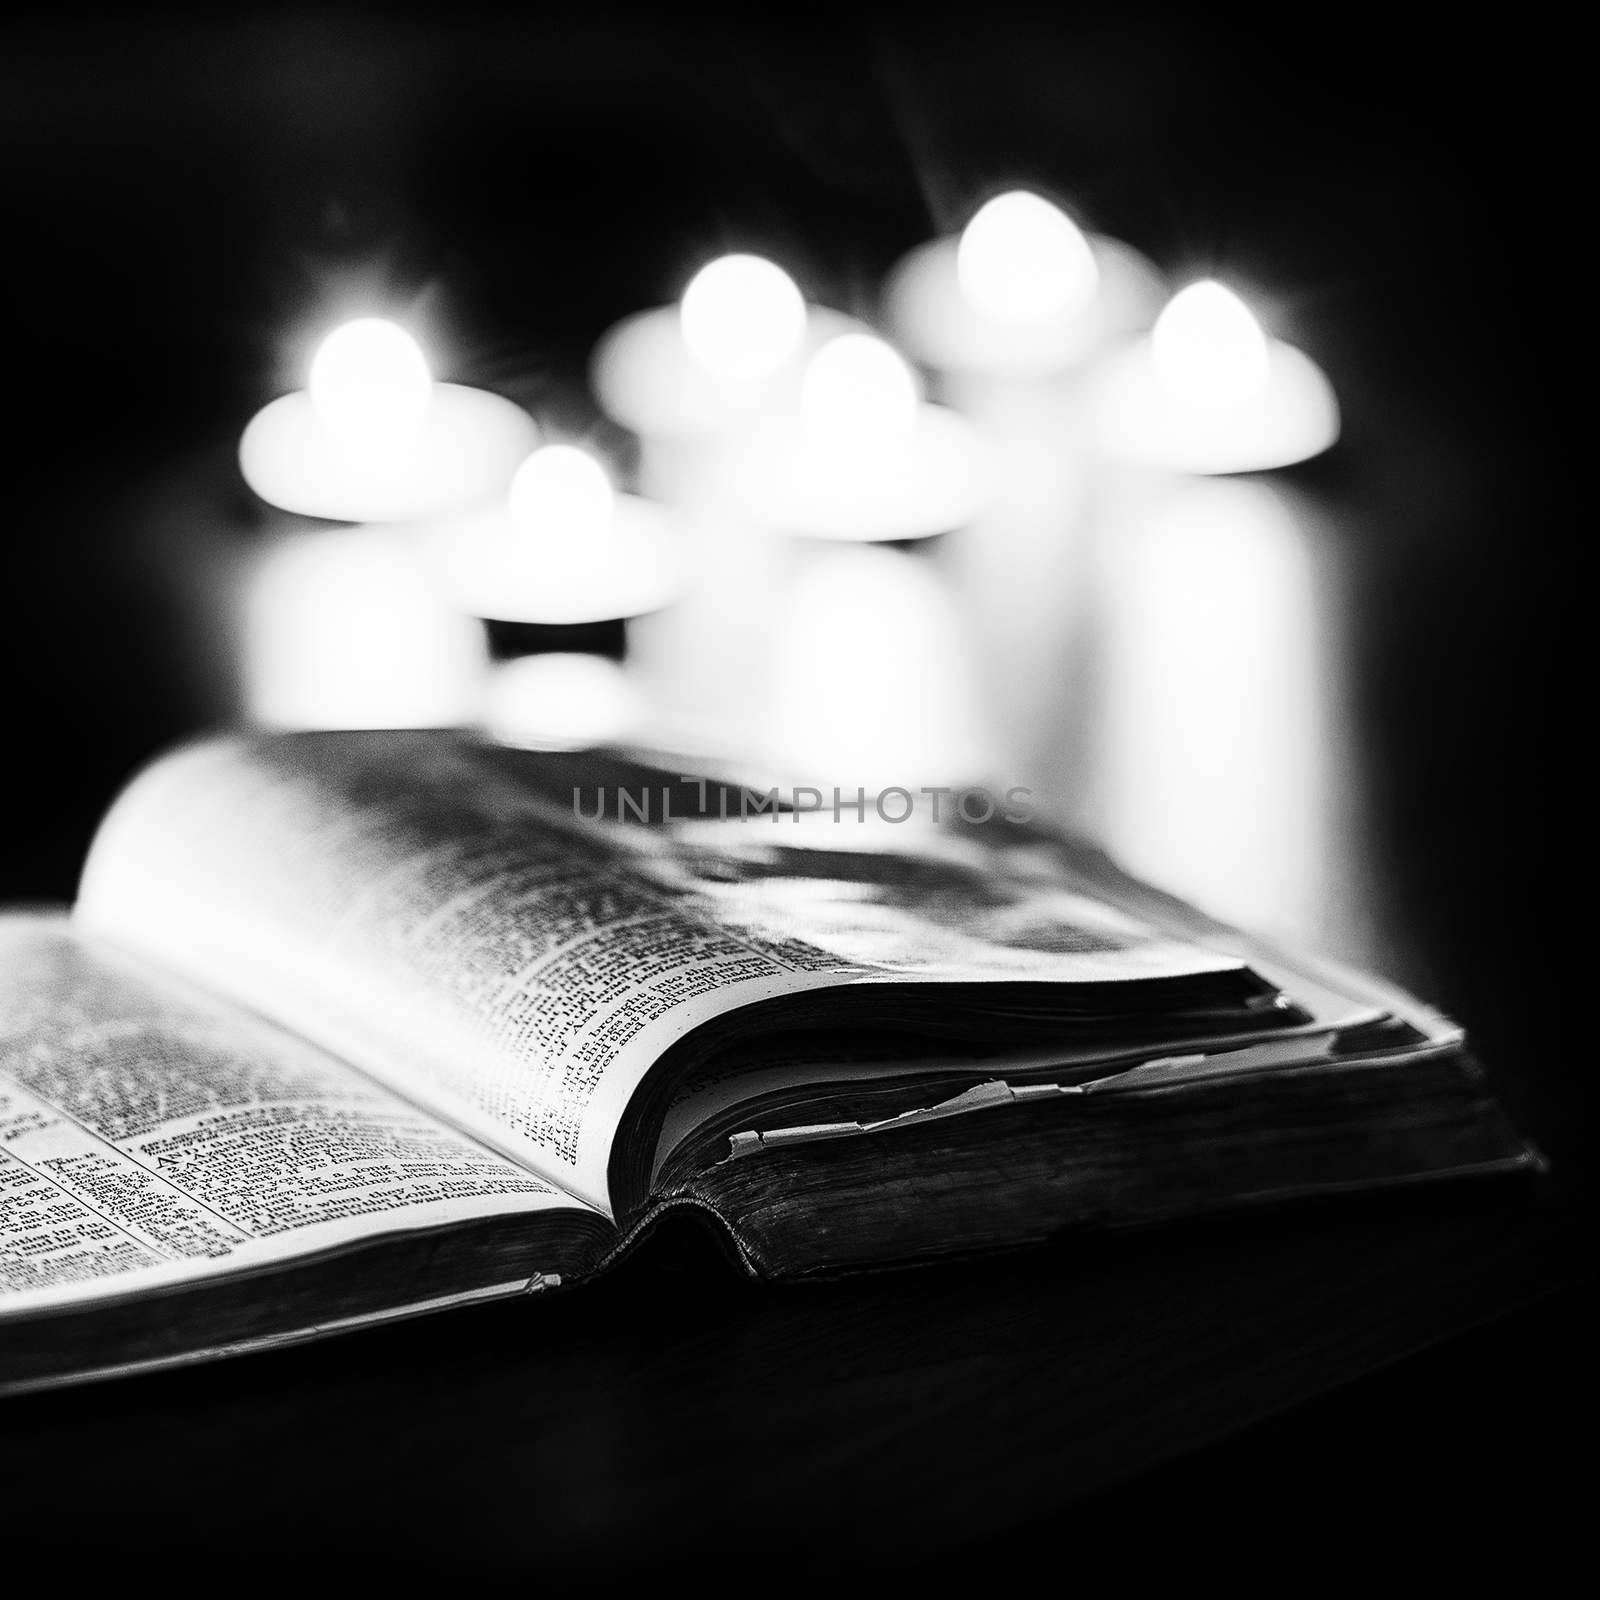 Bible with candles in the background. Low light high contrast black and white image.